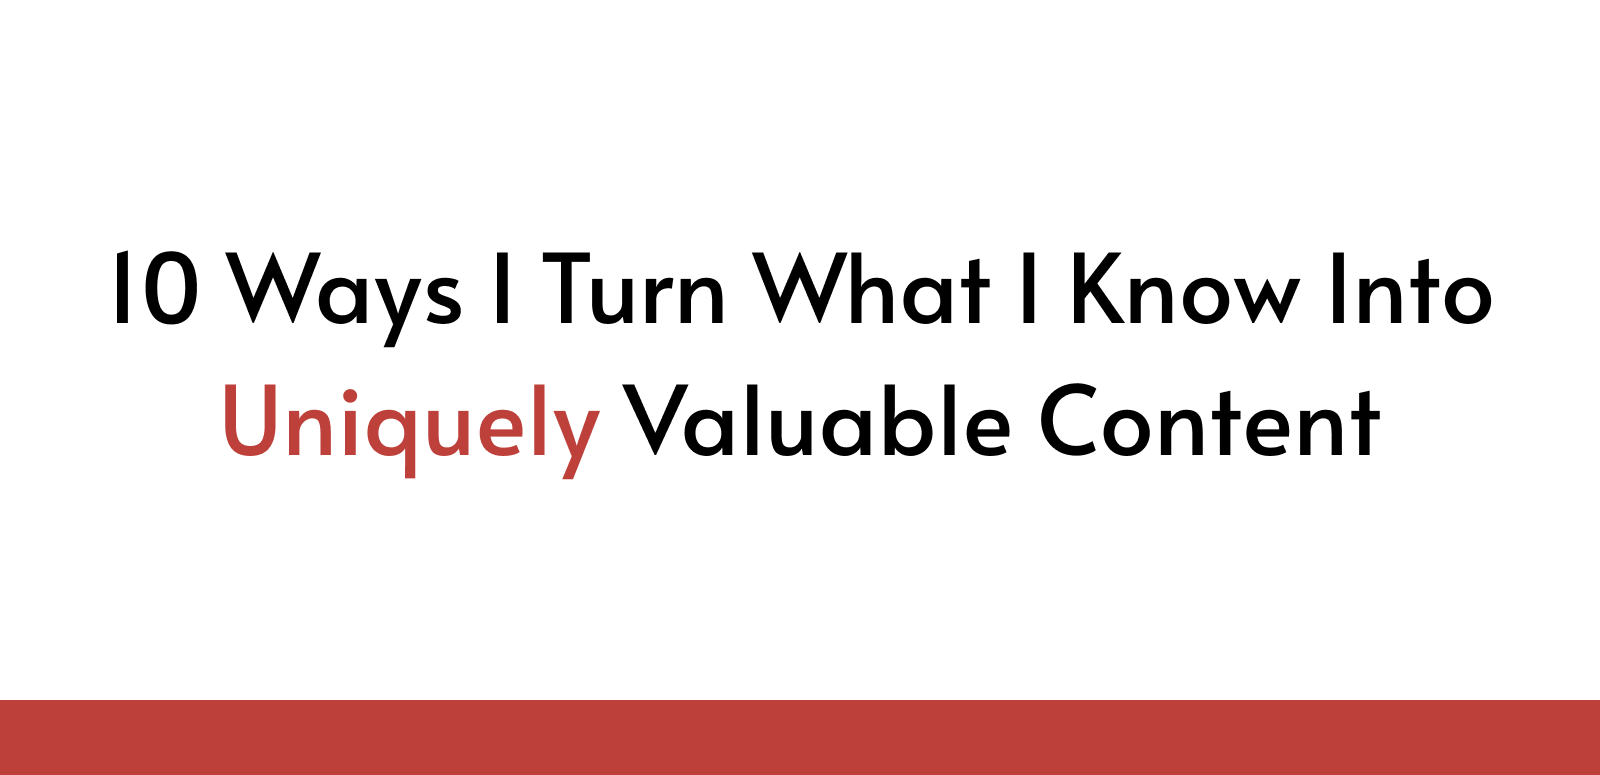 10 Ways I Turn What I Know Into Uniquely Valuable Content